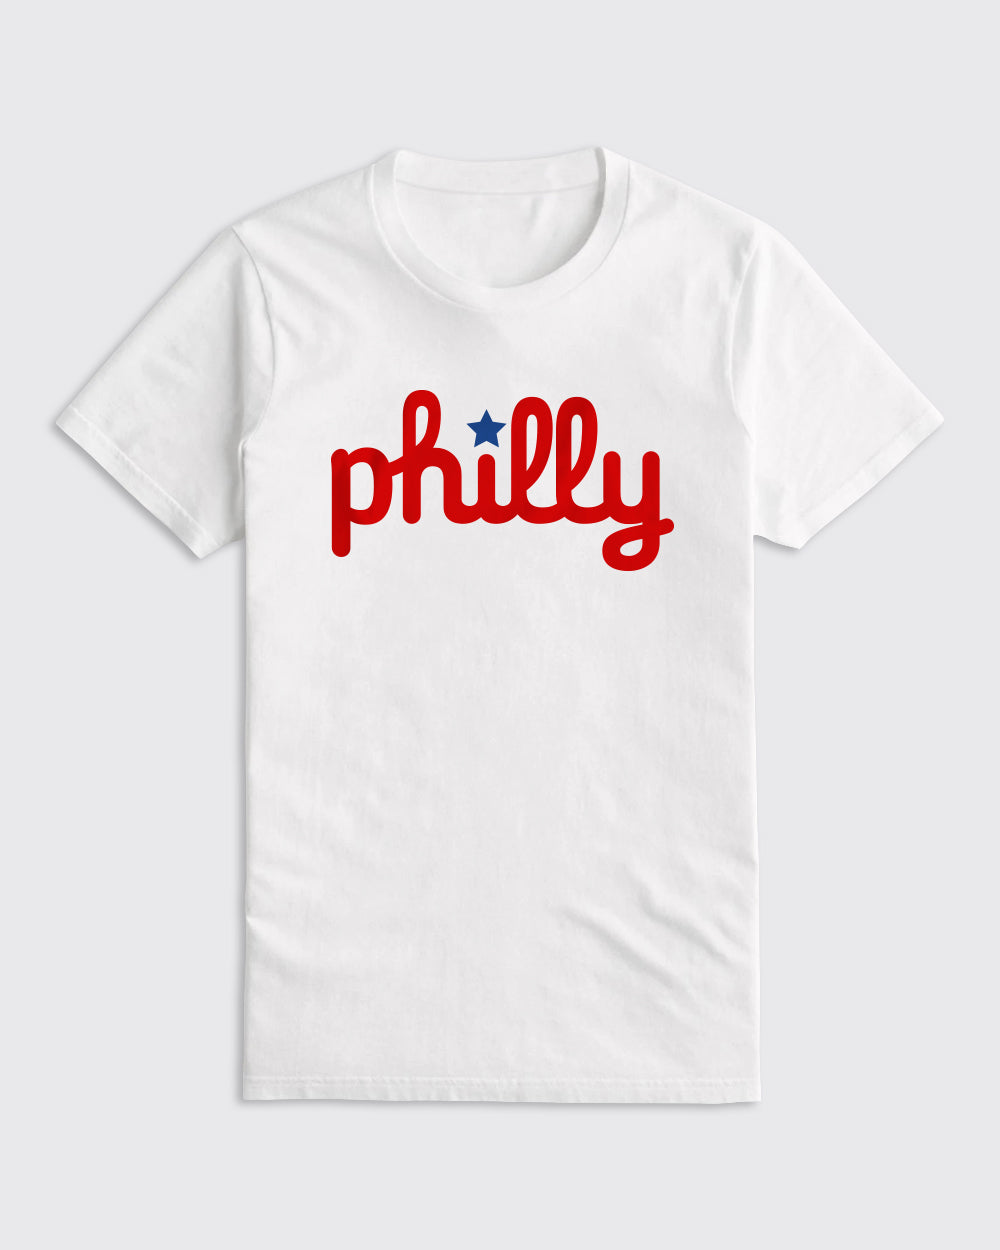 For The Love Of Philly Shirt, Philadenphia 76ers Shirt - High